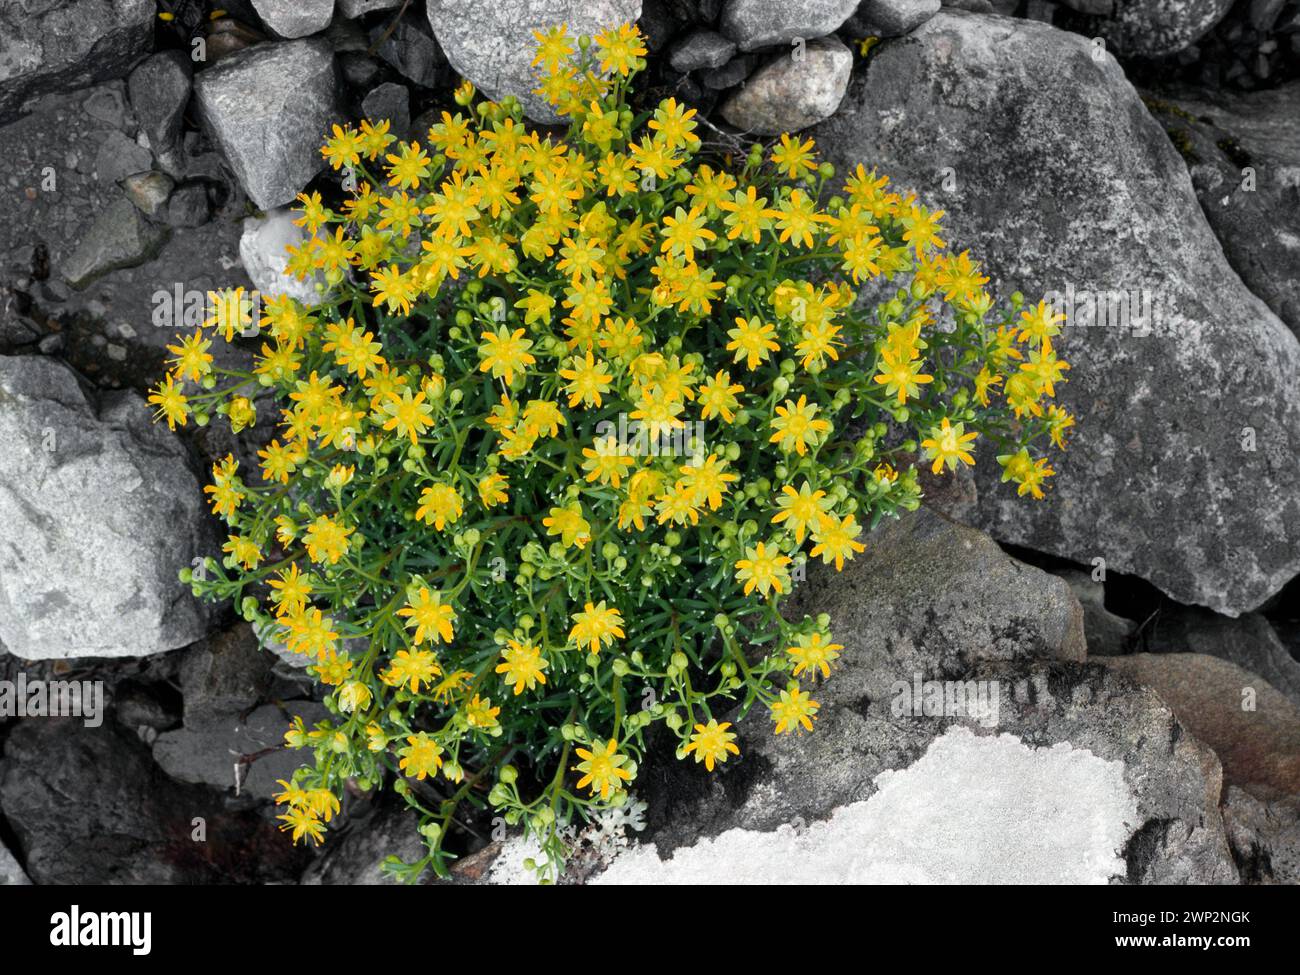 Yellow Saxifrage (Saxifraga aizoides) clump growing on damp, peaty, rocky ground at base of roadside rock-cutting, Inverness-shire, Scotland, June Stock Photo